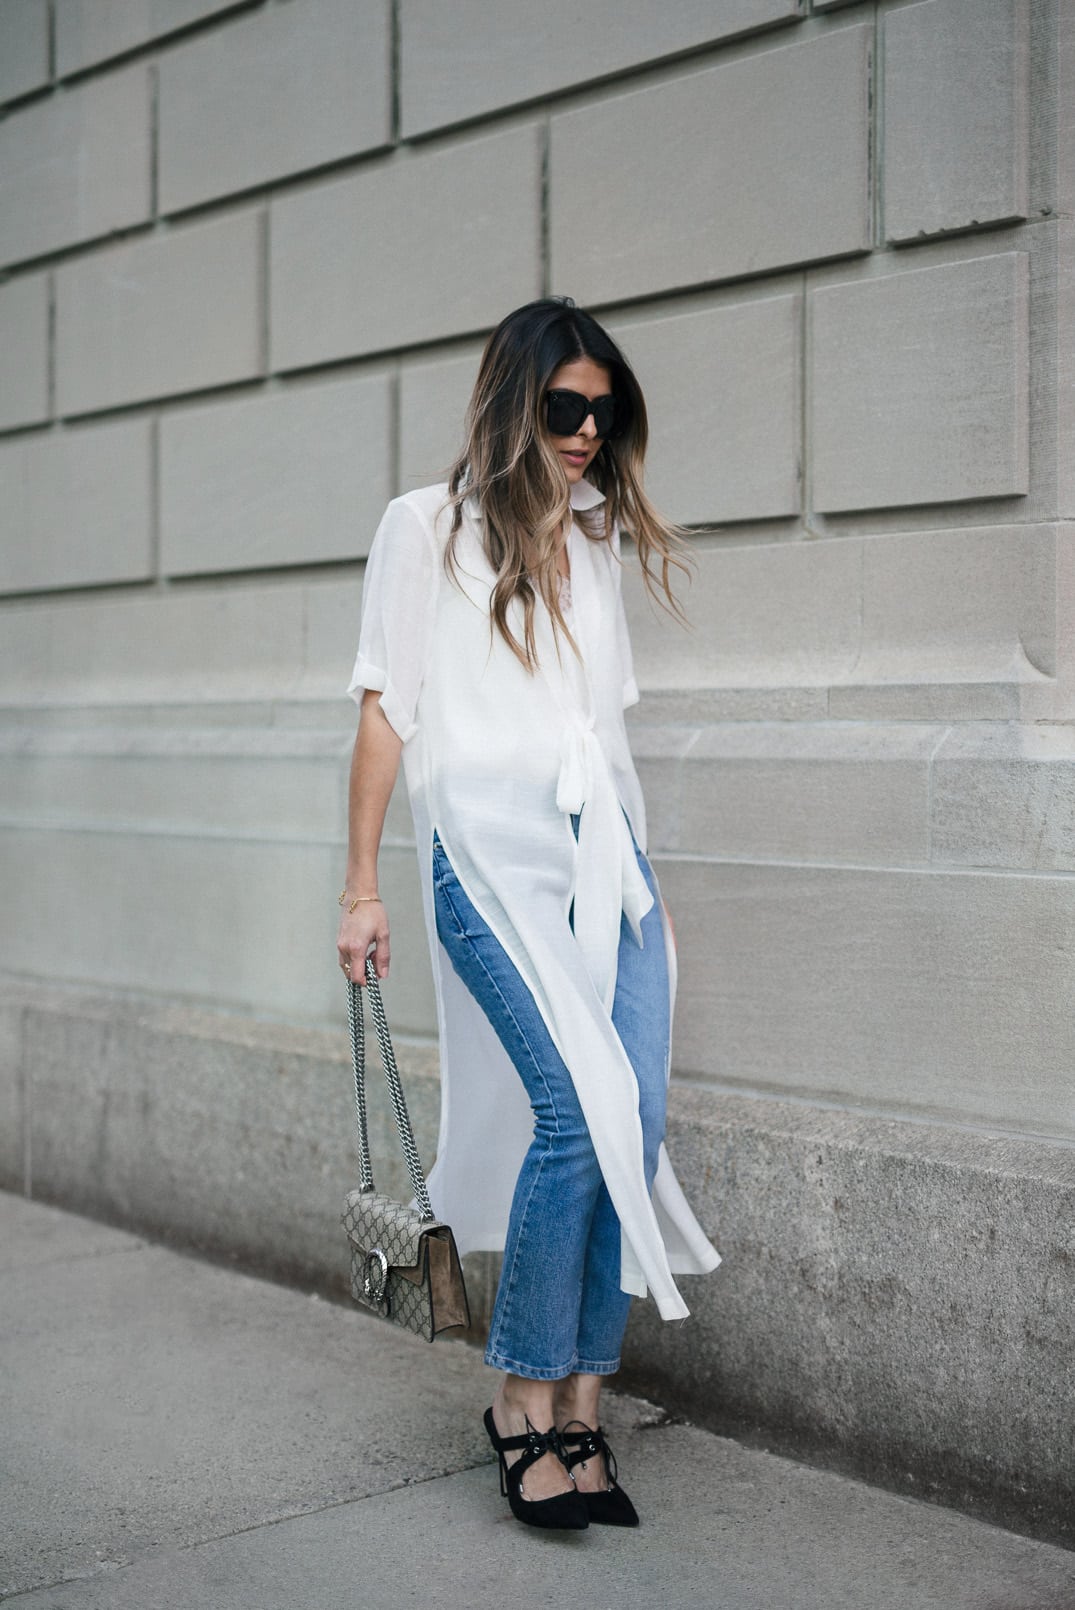 asos shirt dress, mango cropped jeans, asos pointed heeled mules, gucci dionysus bag, celine sunglasses-4 copy